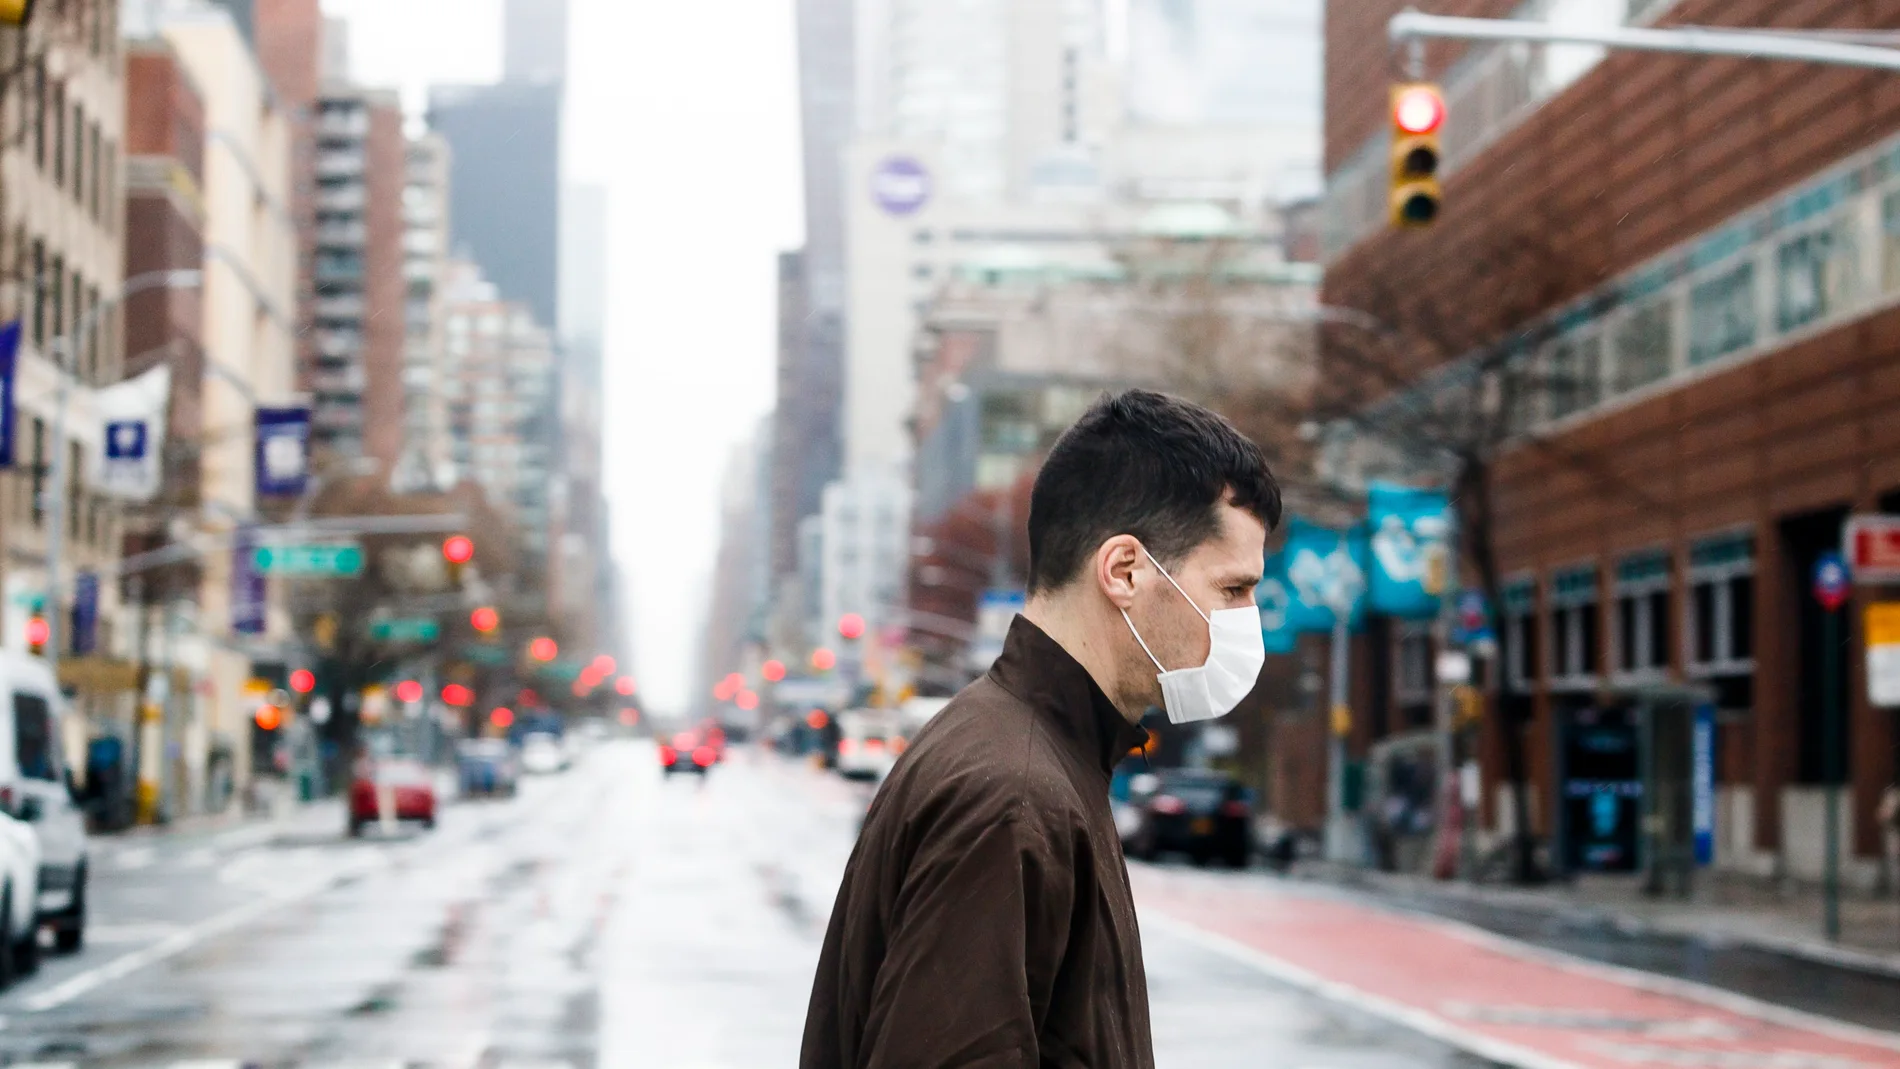 New York (United States), 28/03/2020.- A man in a protective mask crosses a quiet avenue in New York, New York, USA, on 28 March 2020. The city is continuing to deal with one of the country'Äôs largest outbreak of COVID-19 cases as the coronavirus spreads. The region has shutdown of all non-essential businesses in an effort to keep the city'Äôs hospital system from being overwhelmed with seriously ill COVID-19 patients. (Estados Unidos, Nueva York) EFE/EPA/JUSTIN LANE